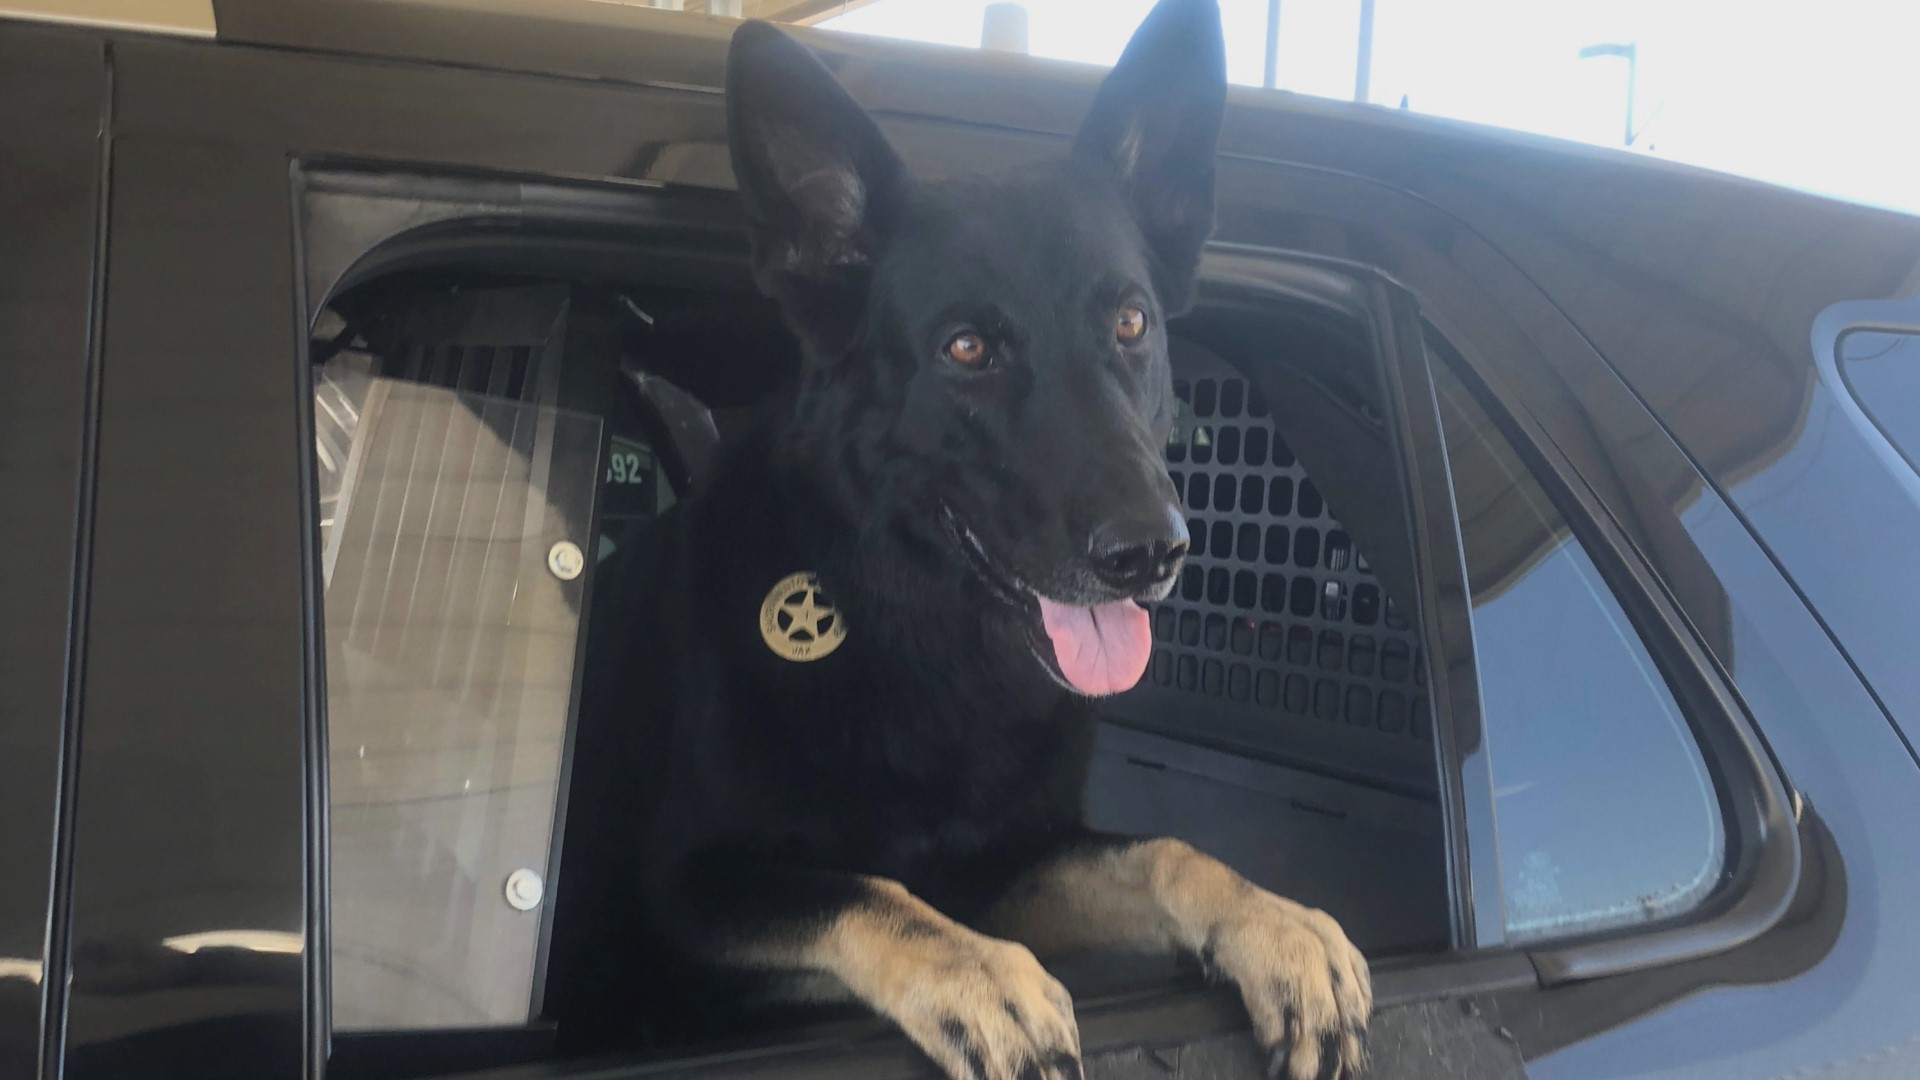 Sacramento Police say $22,000 has been raised so far to benefit the canine campaign. He says that's enough money to purchase a K9 for the department in Tara's name.